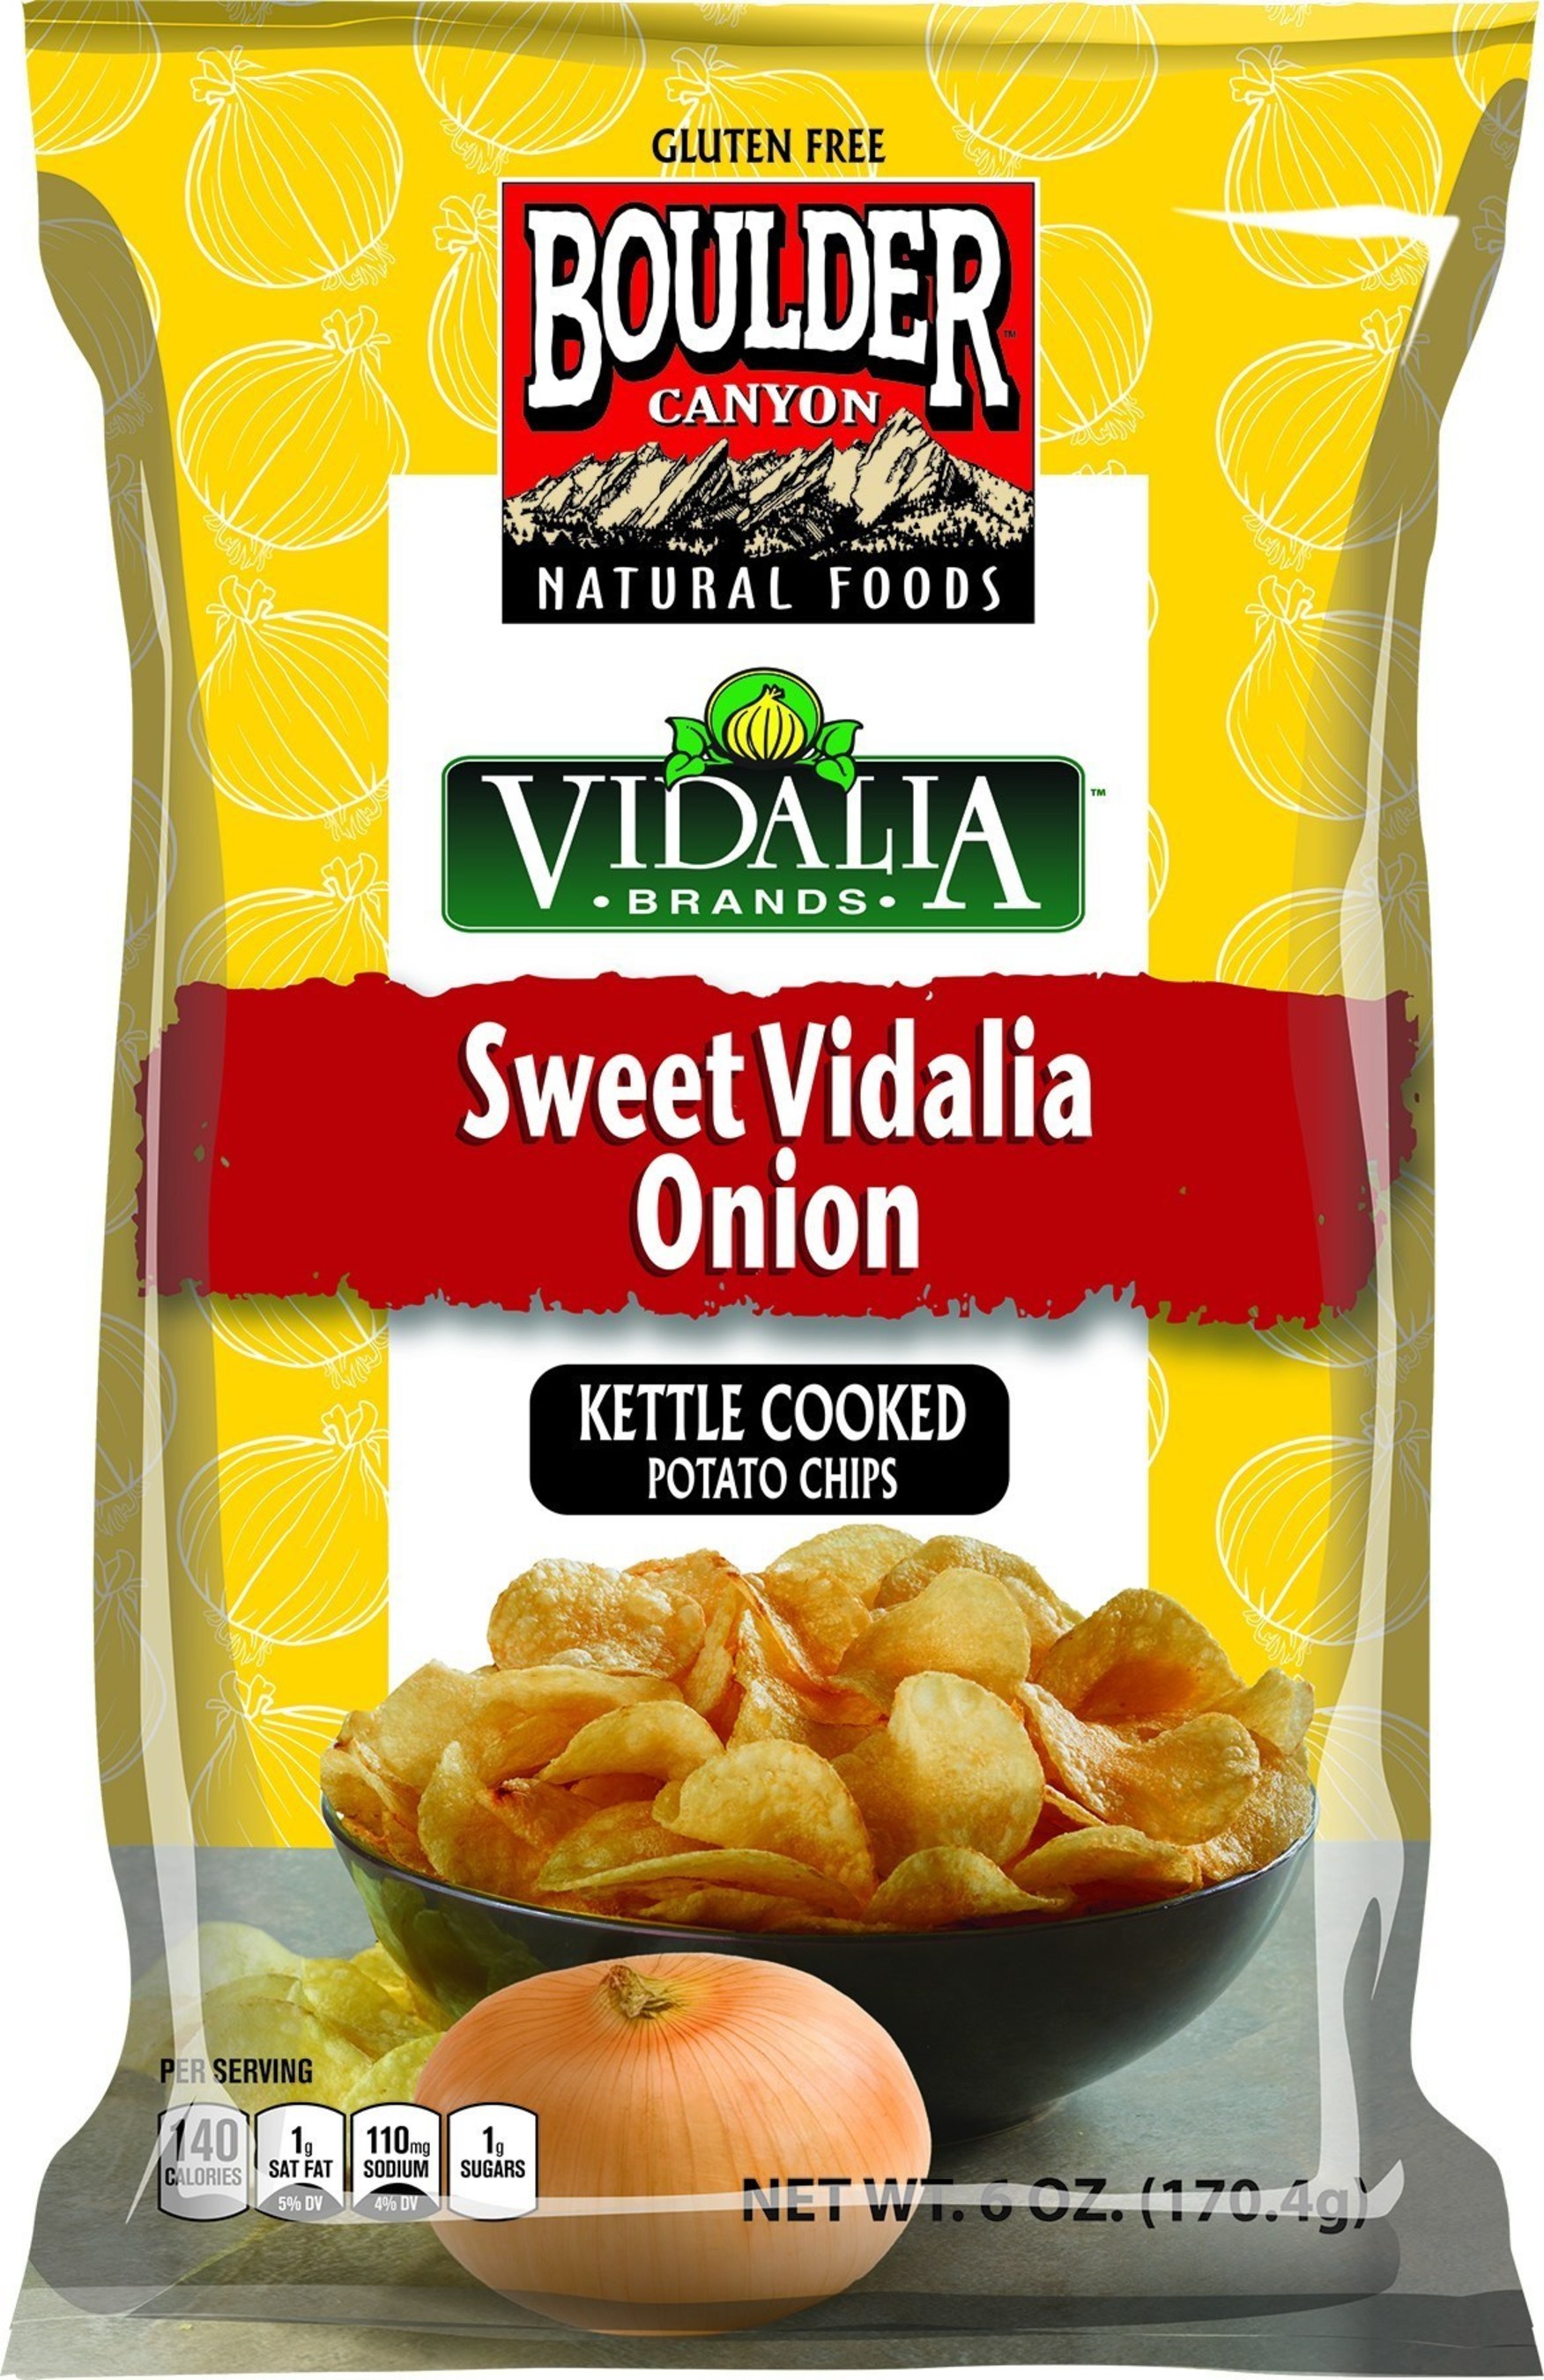 Inventure Foods, Inc. partners with Vidalia Brands(R) Inc. to develop the first potato chip seasoning made from the legendary sweet onion